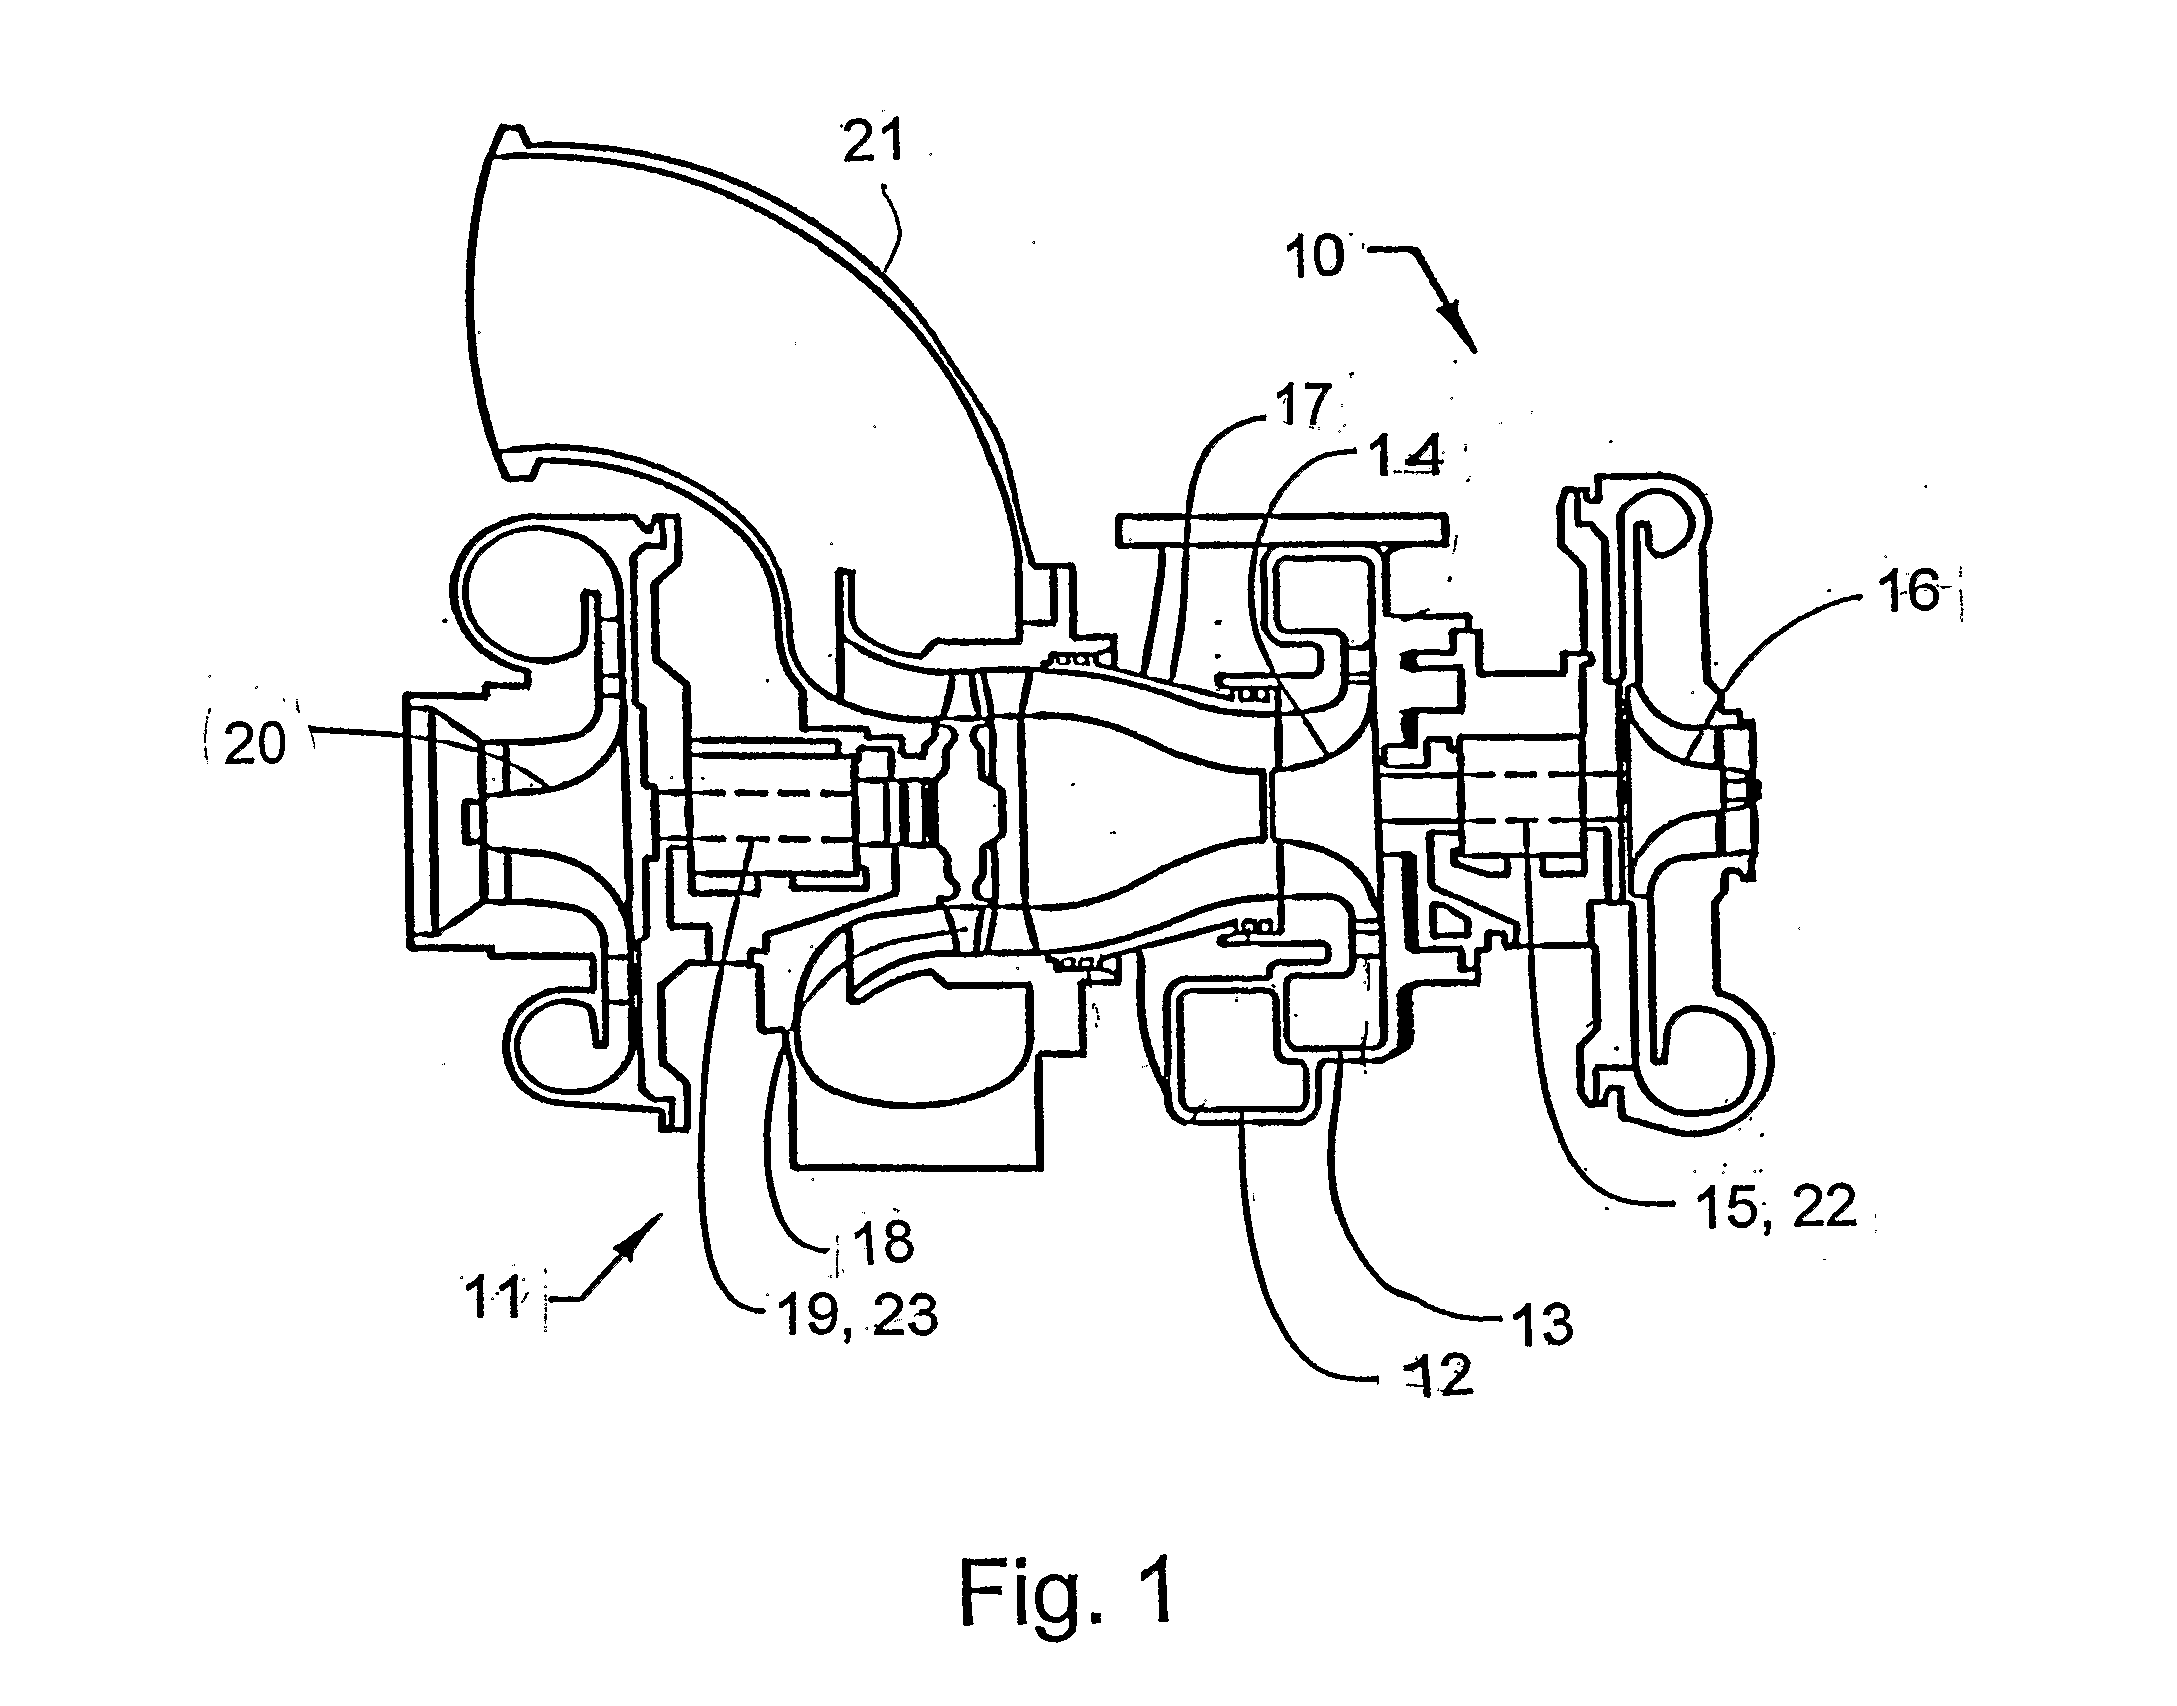 Turbo Charger Unit With Bearings For A Rotor Shaft